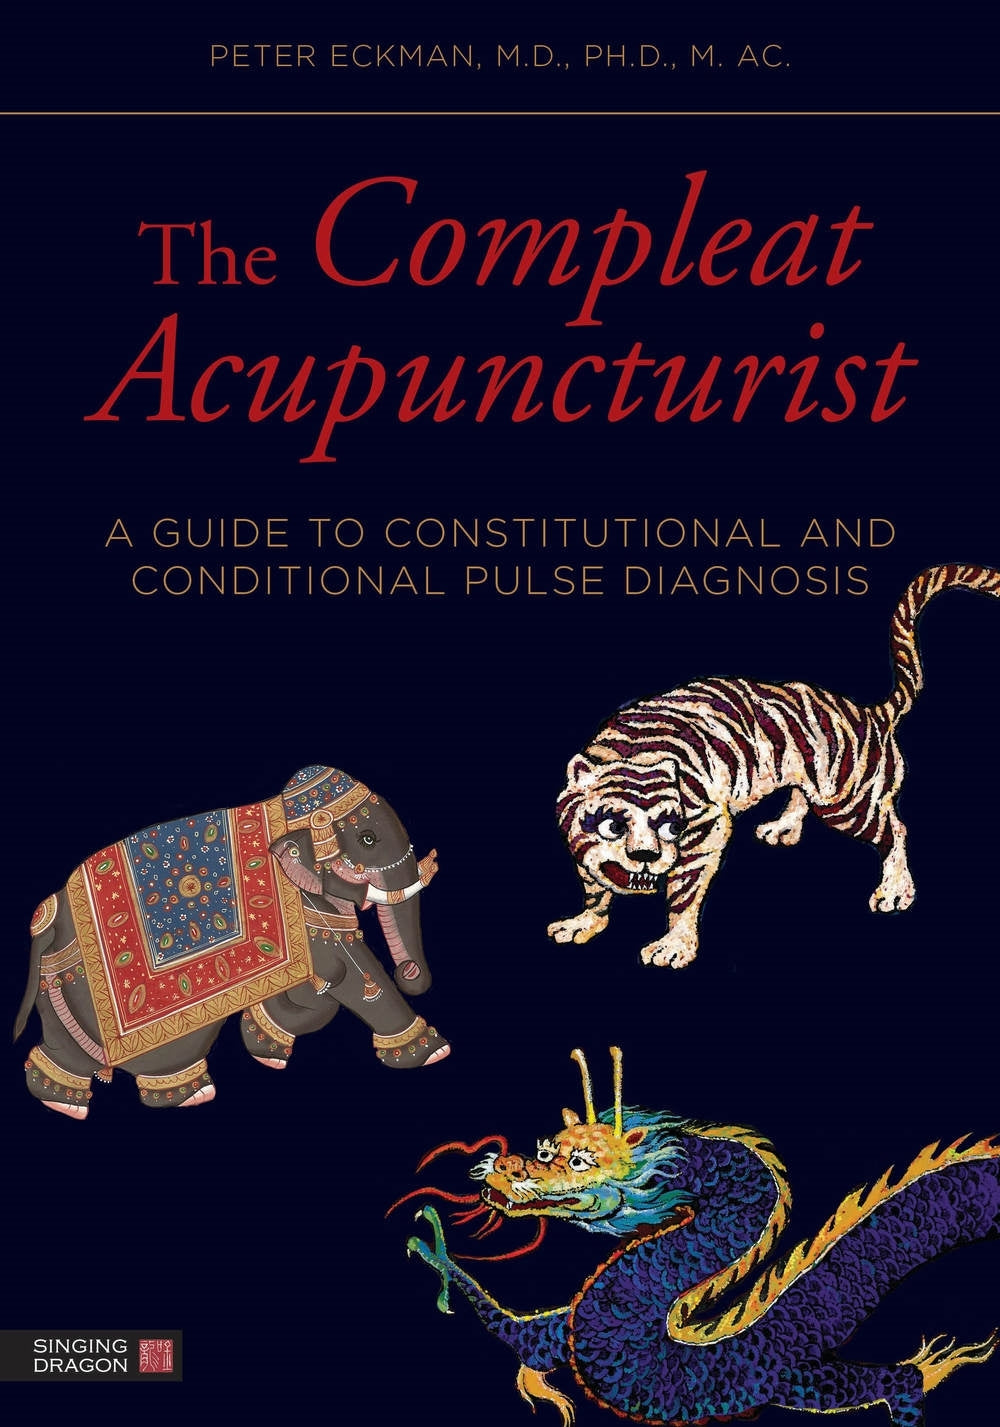 The Compleat Acupuncturist by William R. Morris, Peter Eckman